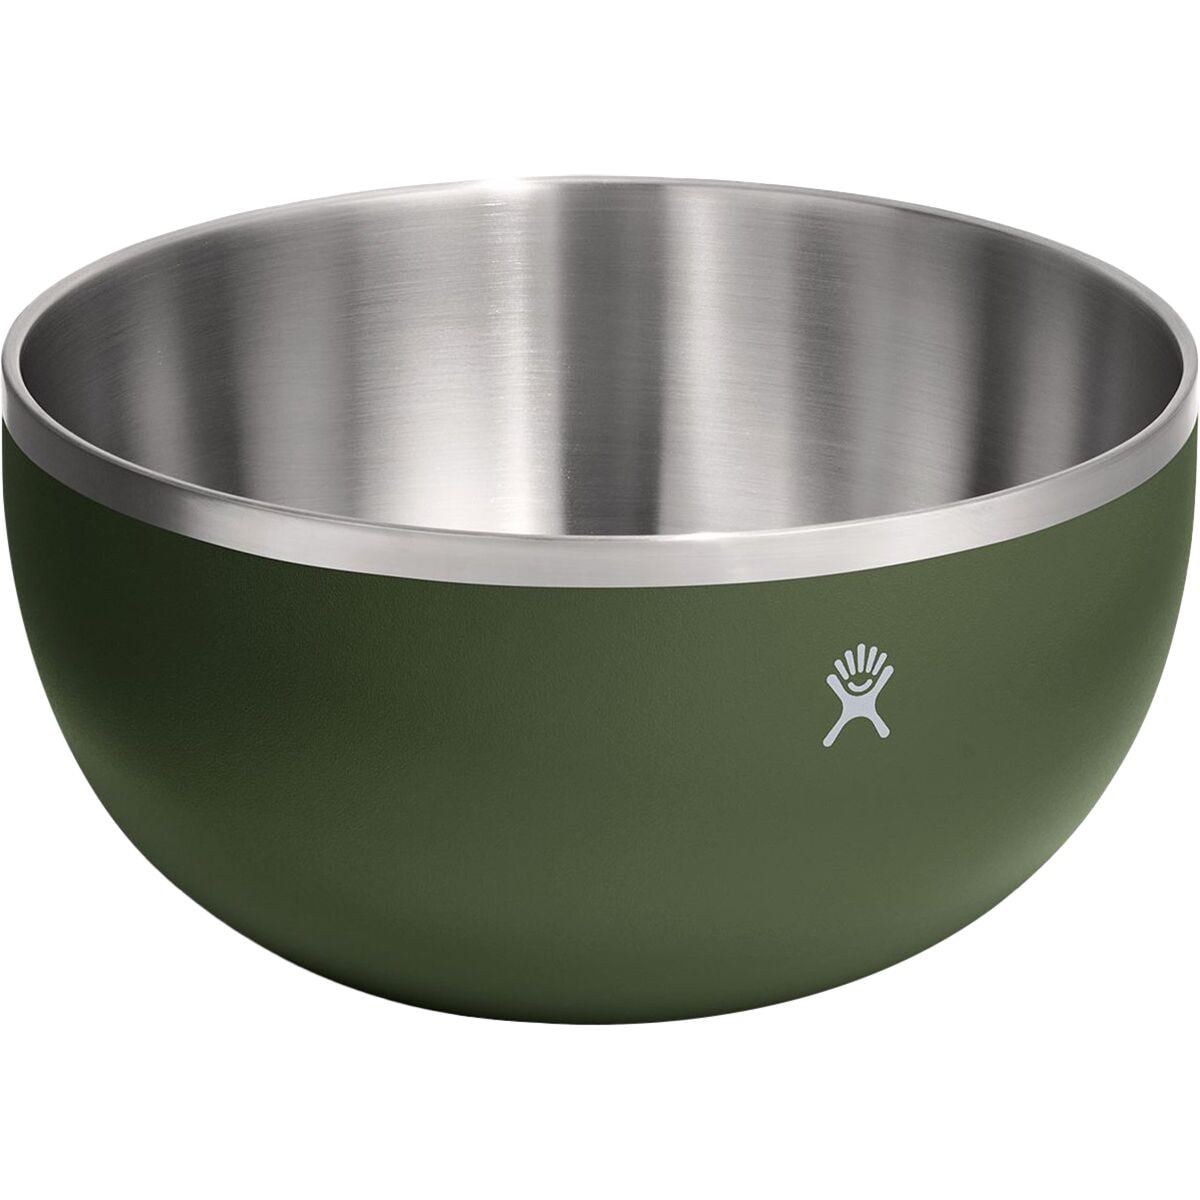 Hydro Flask 3qt Bowl with Lid